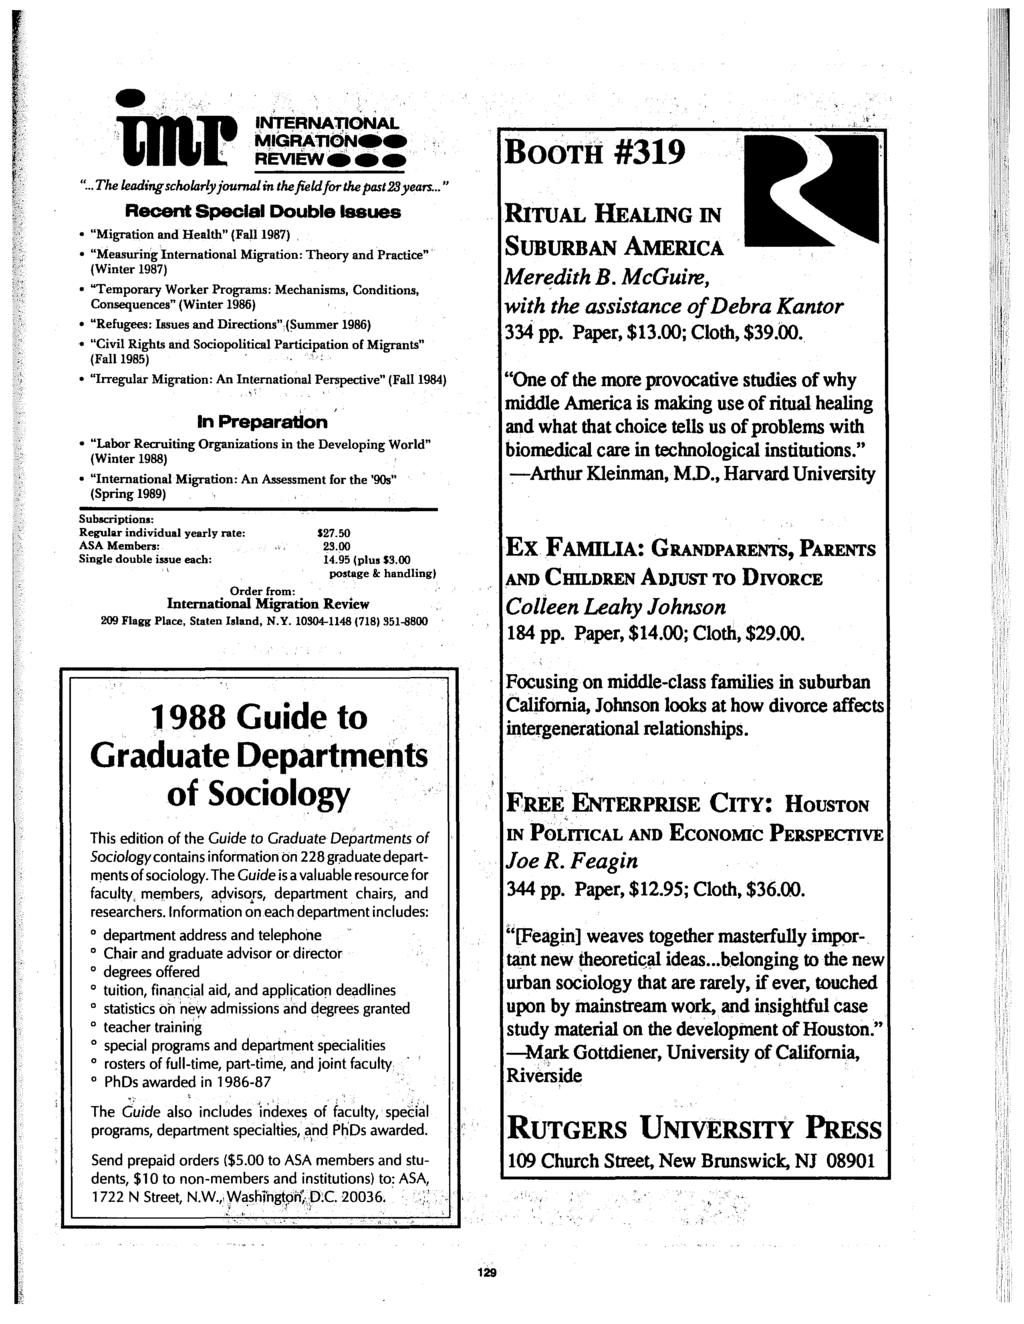 ' INTERNATIONAL MIGFIA"'looee REvleweee "... The leading scholarly journal in the field for the past23 years... " Recent Special Double Issues "Migration and Health" (Fall1987).